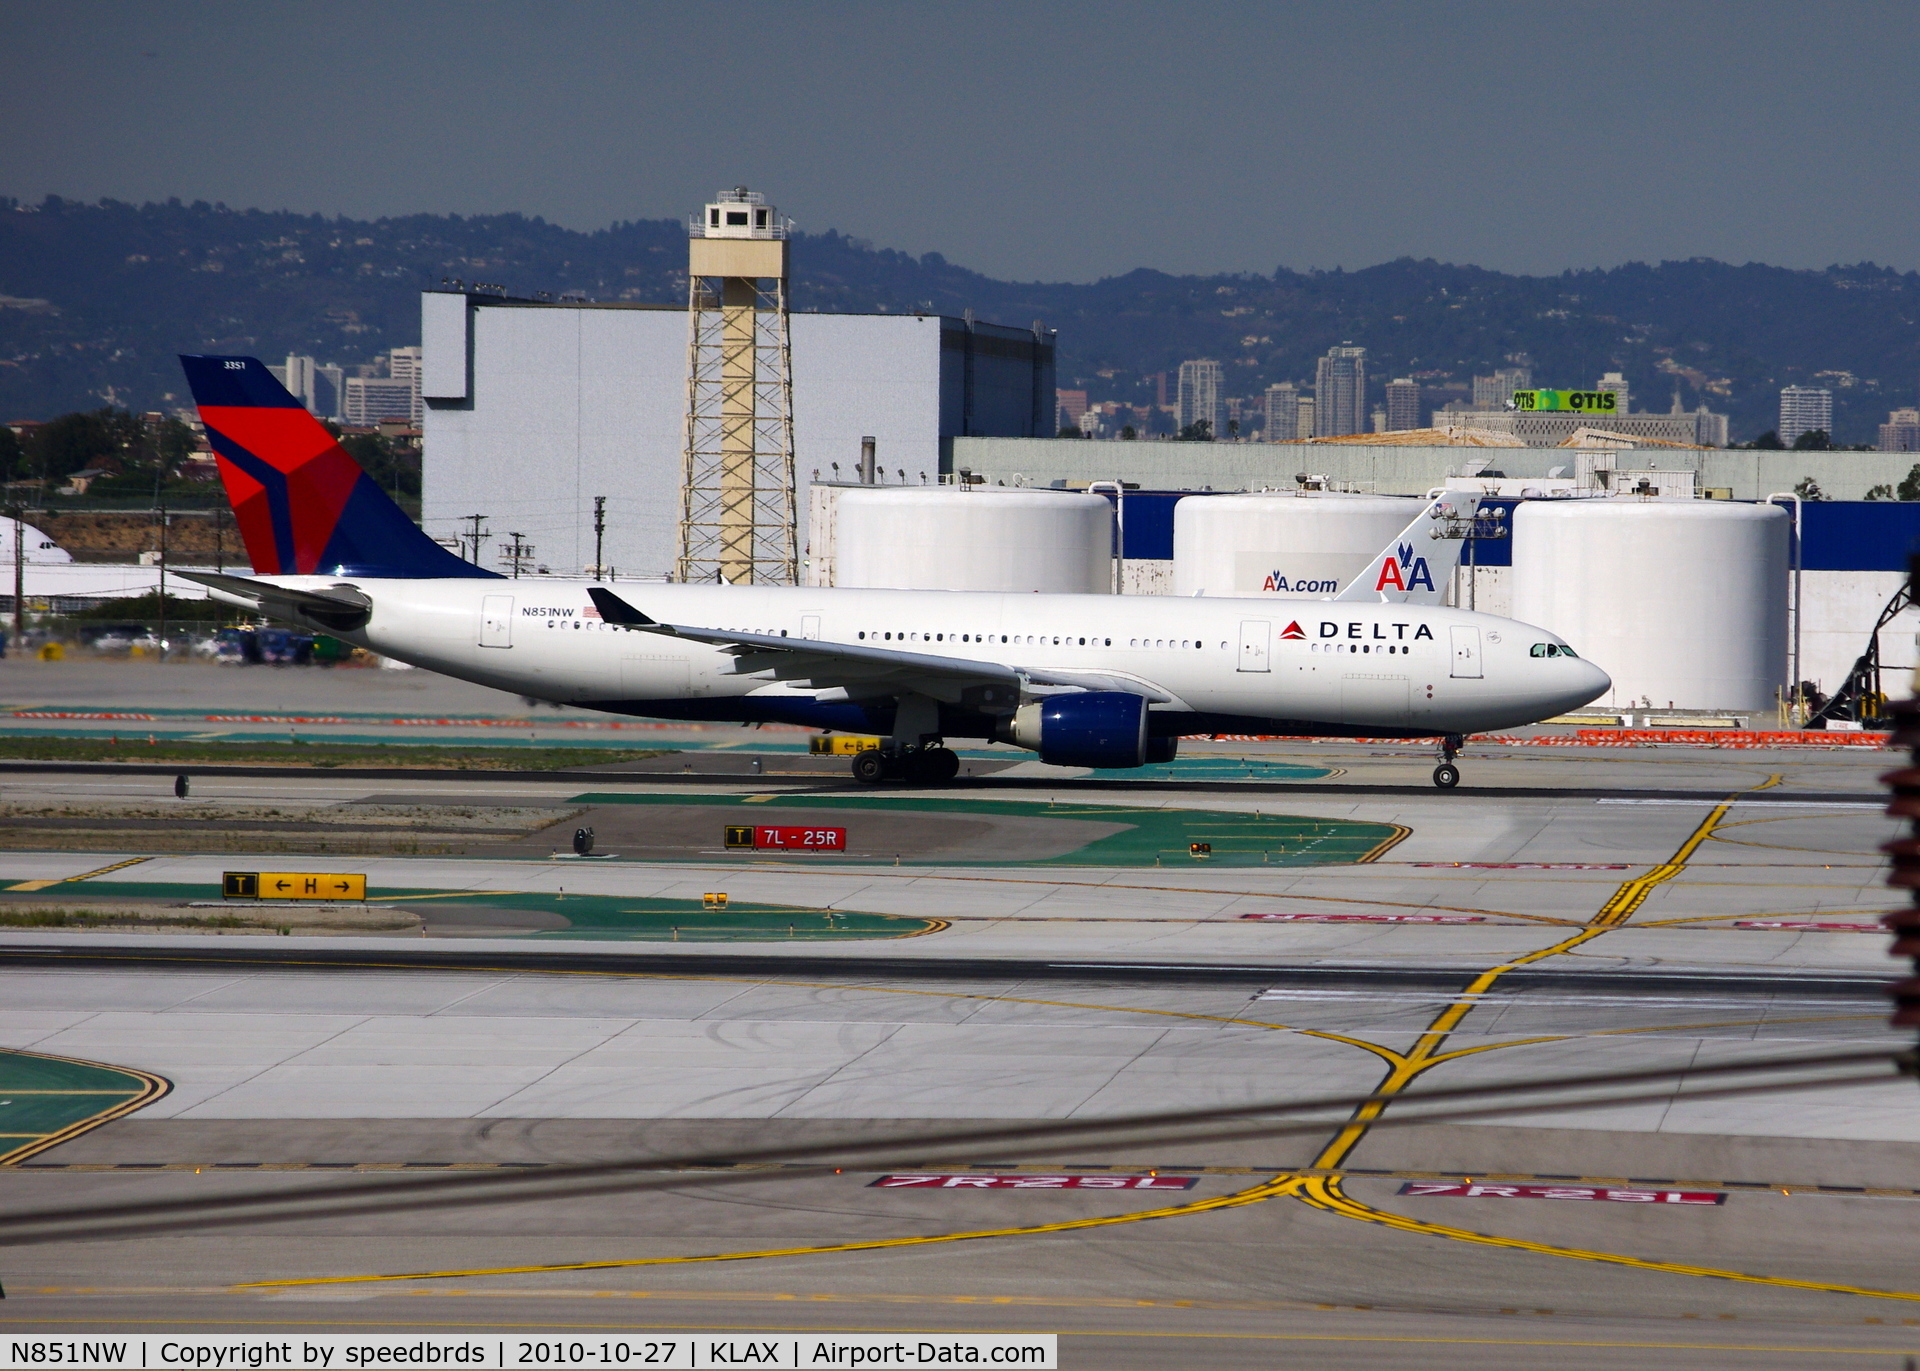 N851NW, 2004 Airbus A330-223 C/N 0609, Delta A330-200 former NWA departing against traffic with special permission from LAX ATC.  First time seeing Delta/NWA A330 at LAX.